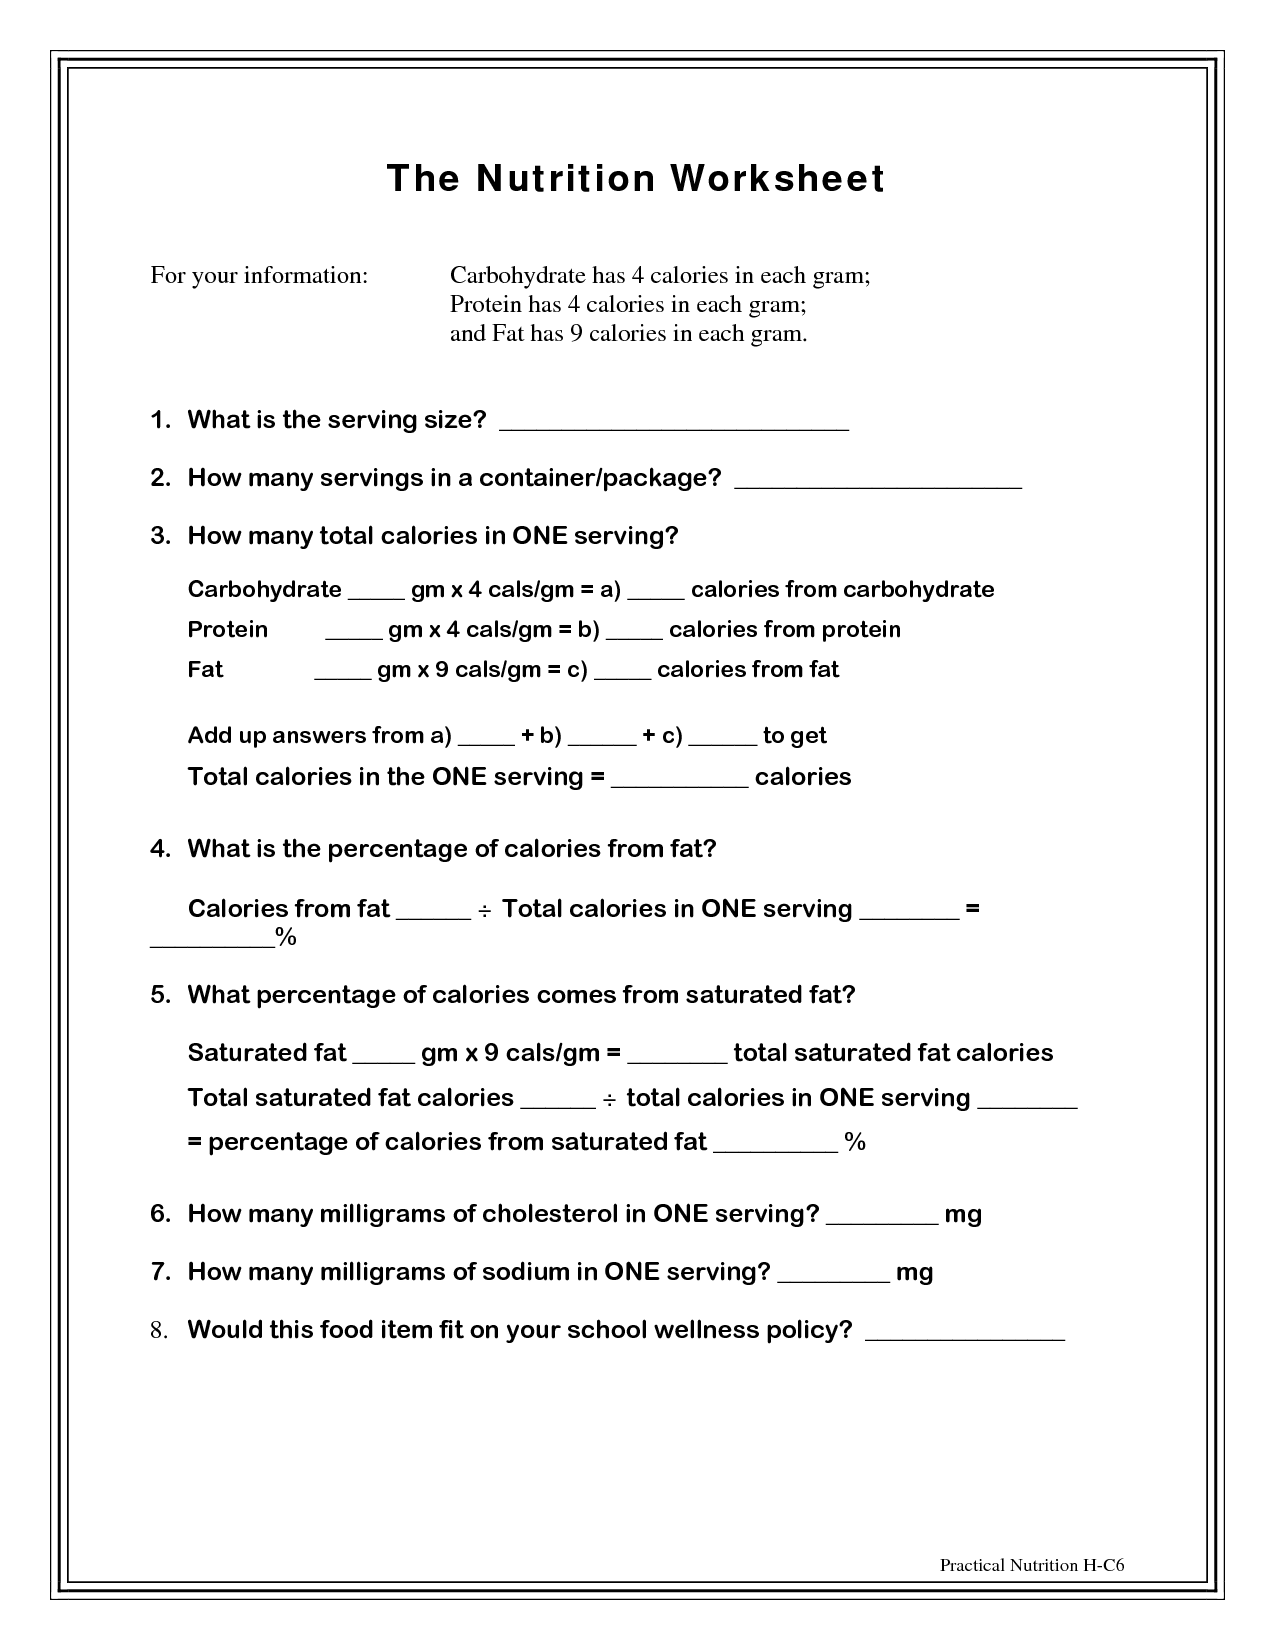 12-best-images-of-nutrient-worksheets-for-students-nutrition